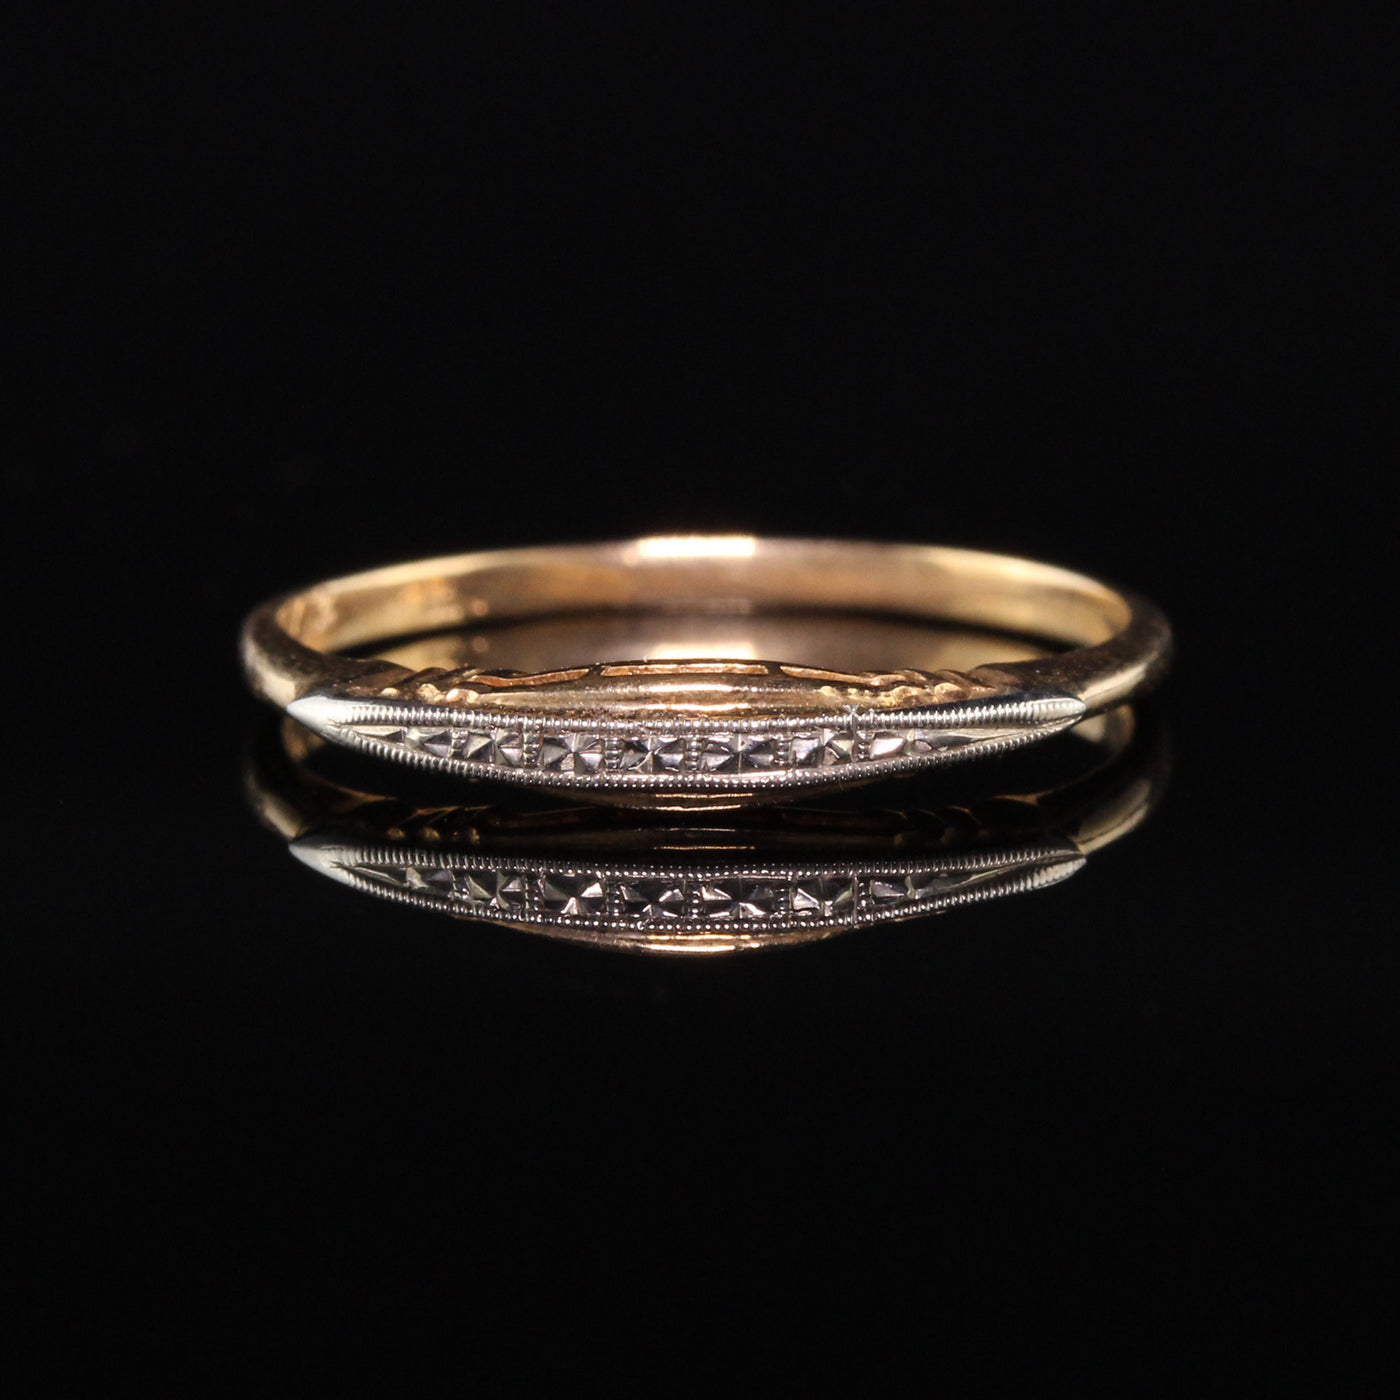 Antique Art Deco 14K Yellow Gold Two Tone Engraved Wedding Band - Size 6